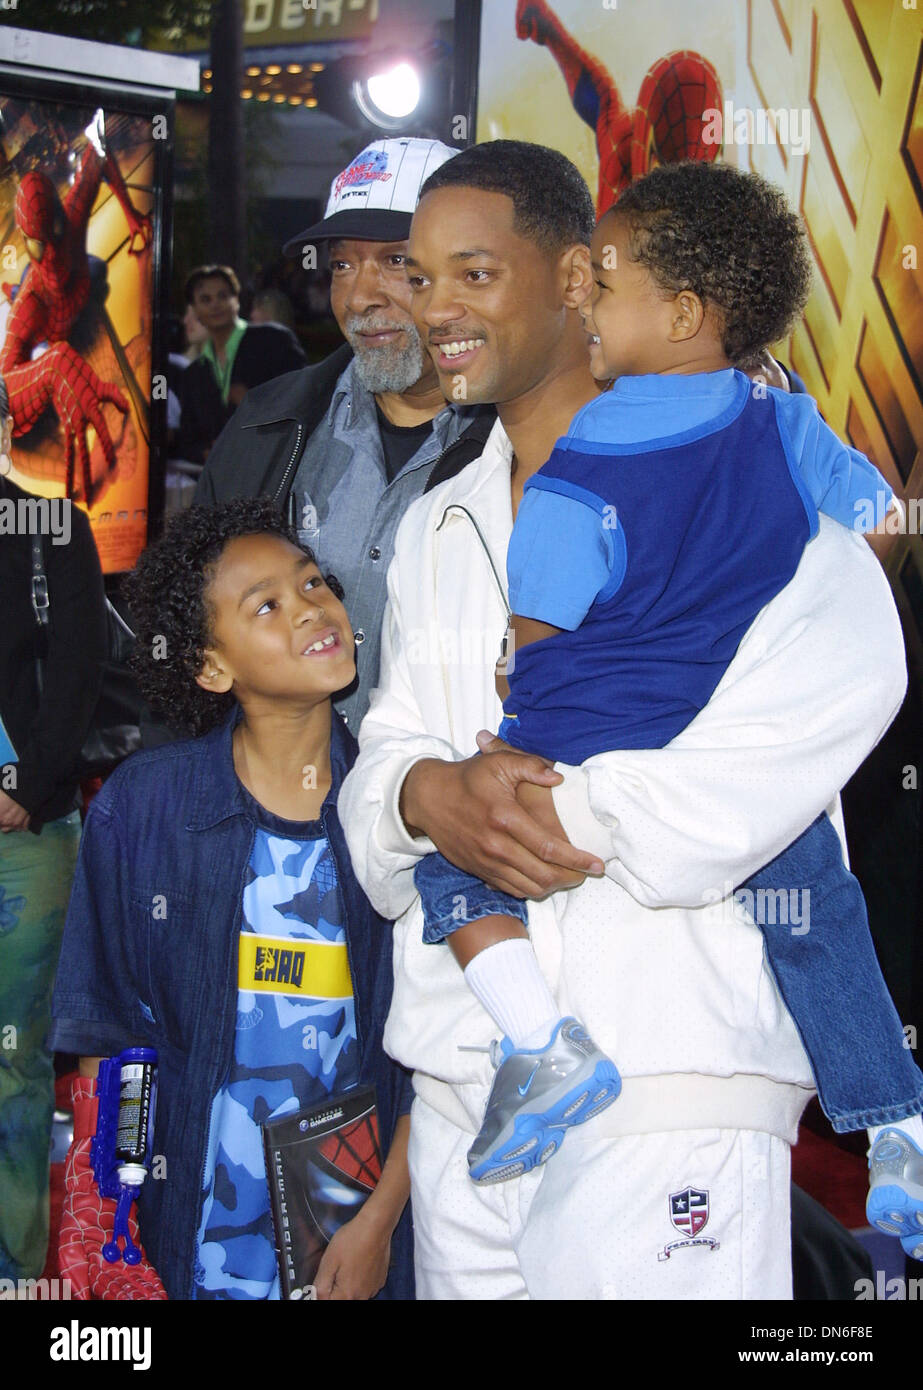 Will Smith Joins Sons Jaden & Trey at Louis Vuitton Event in Paris